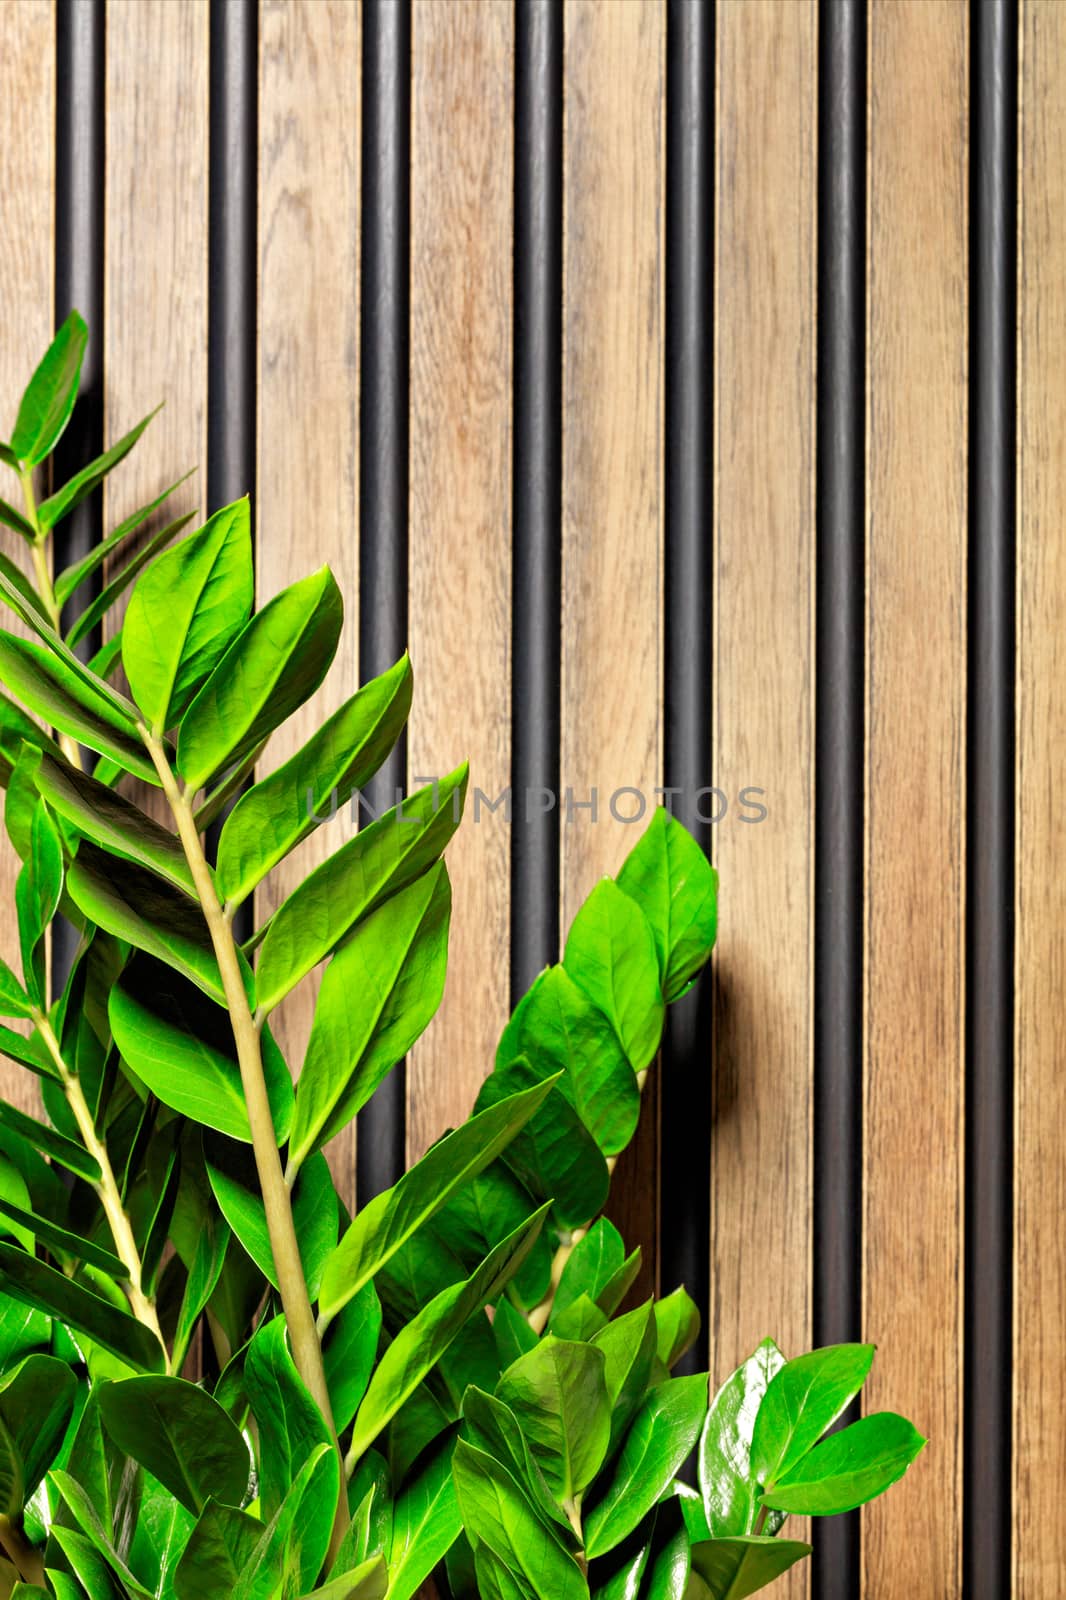 Bright and juicy green stems and leaves of zamioculcas zamifolia or as a dolar tree on the background of a striped wall of wooden vertical planks in blur, copy space.